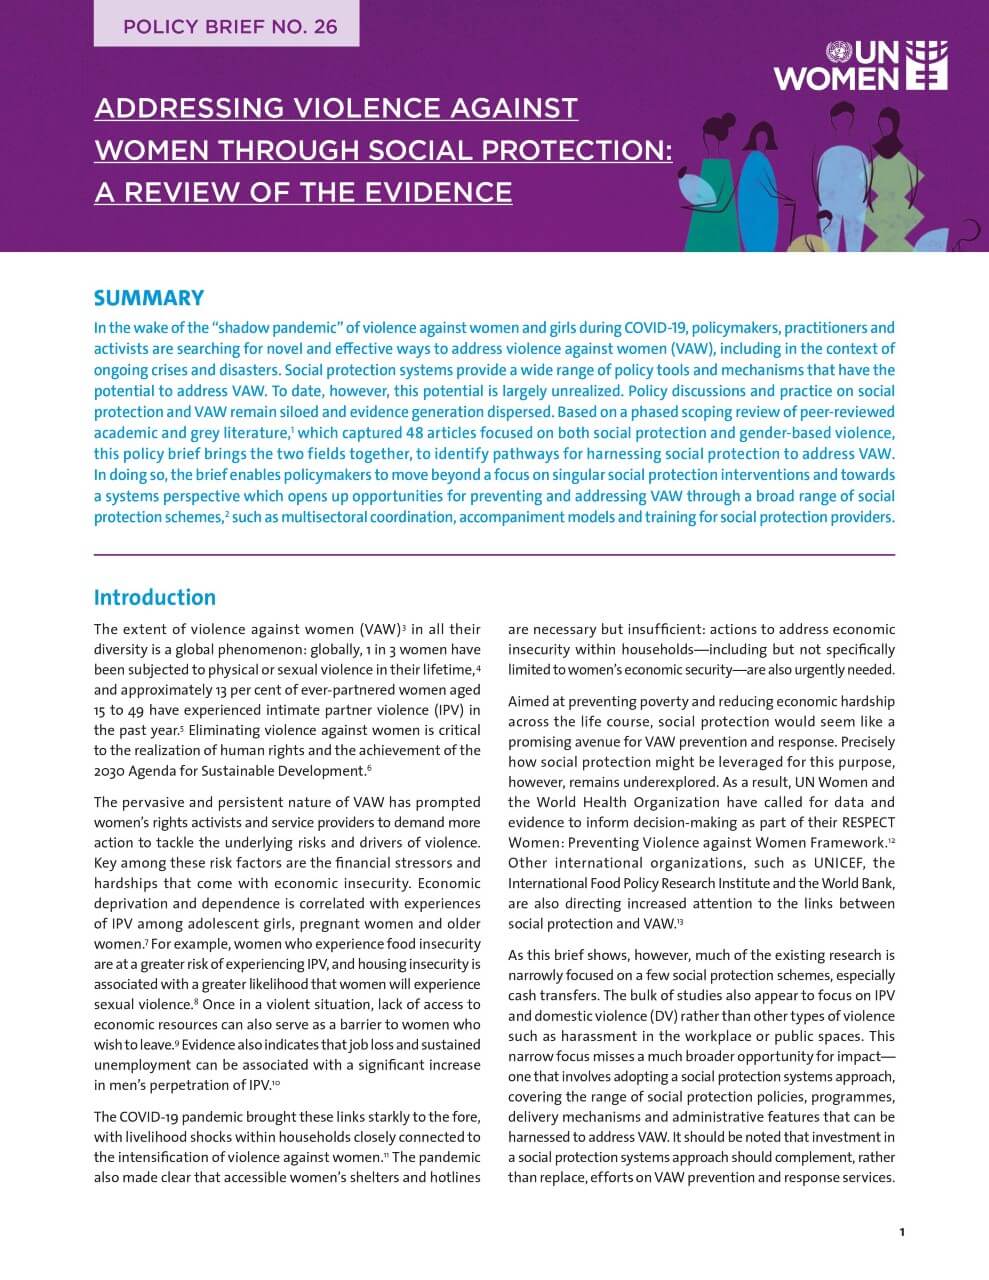 Addressing violence against women through social protection: A review of the evidence